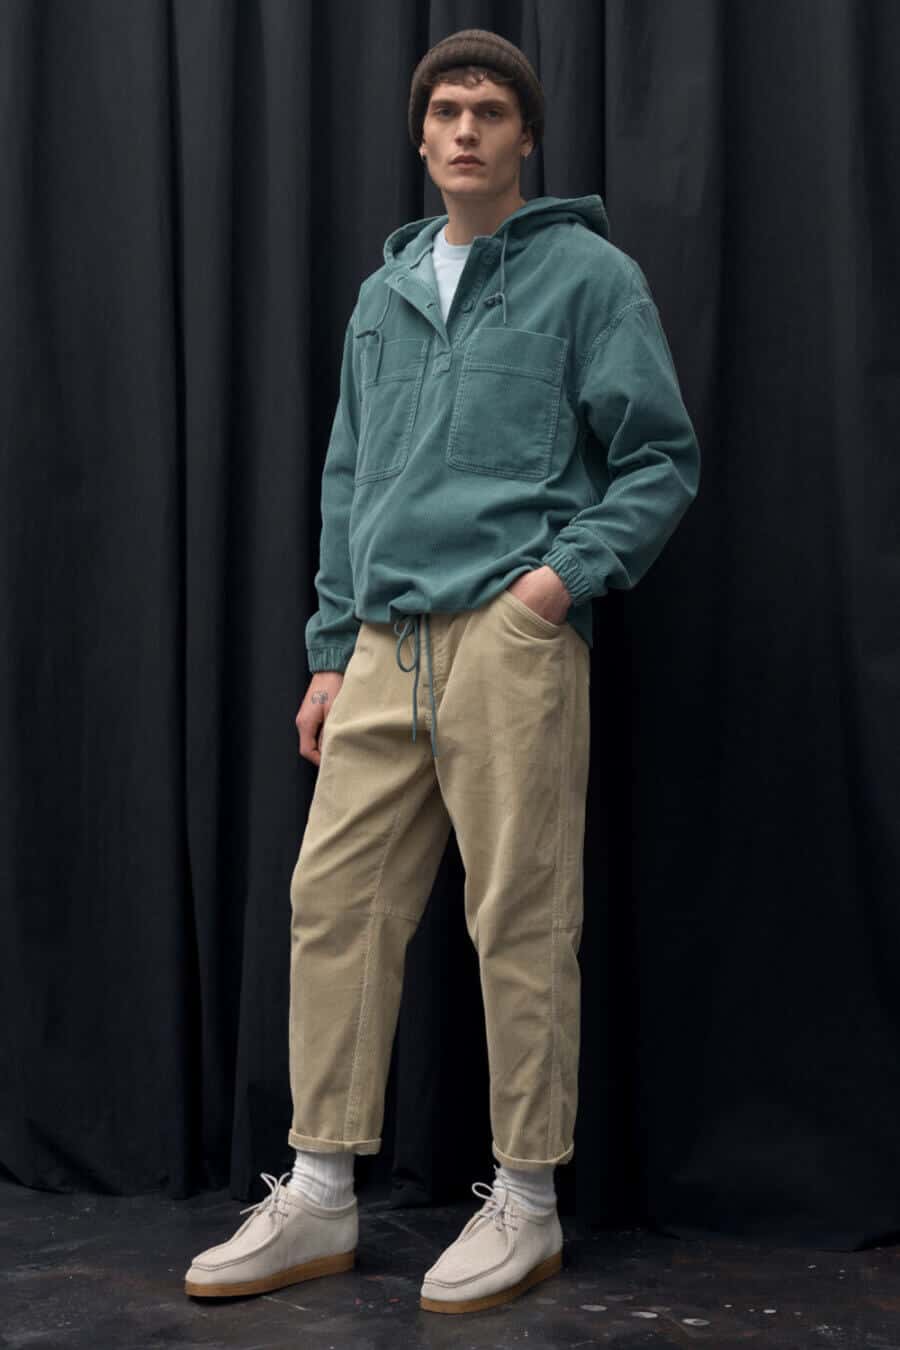 Men's wide khaki pants worn with a fisherman smock and beanie outfit